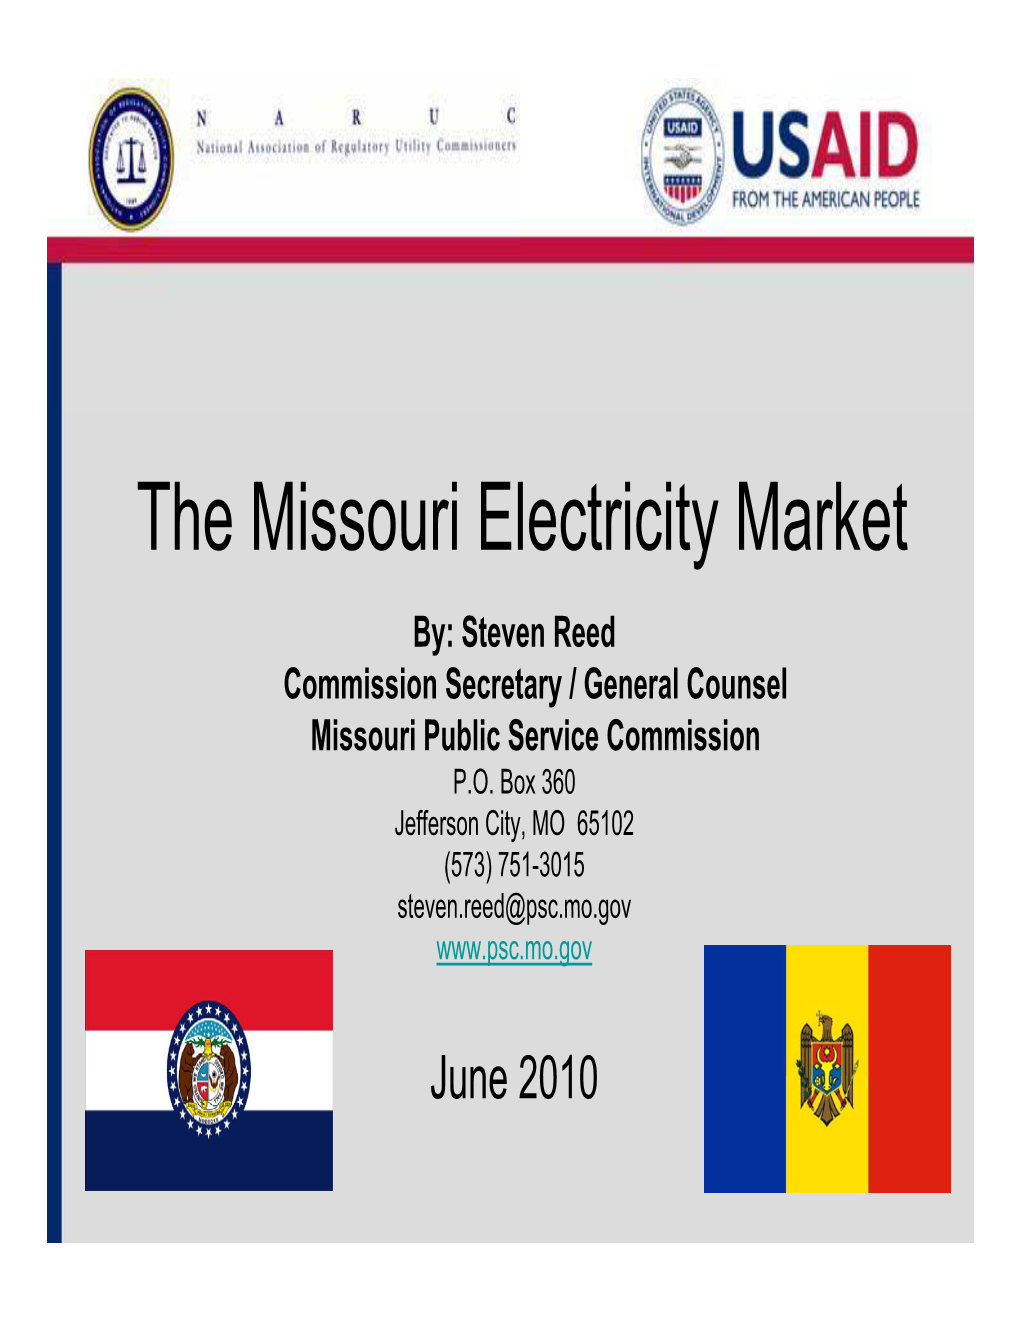 The Missouri Electricity Market By: Steven Reed Commission Secretary / General Counsel Missouri Public Service Commission P.O